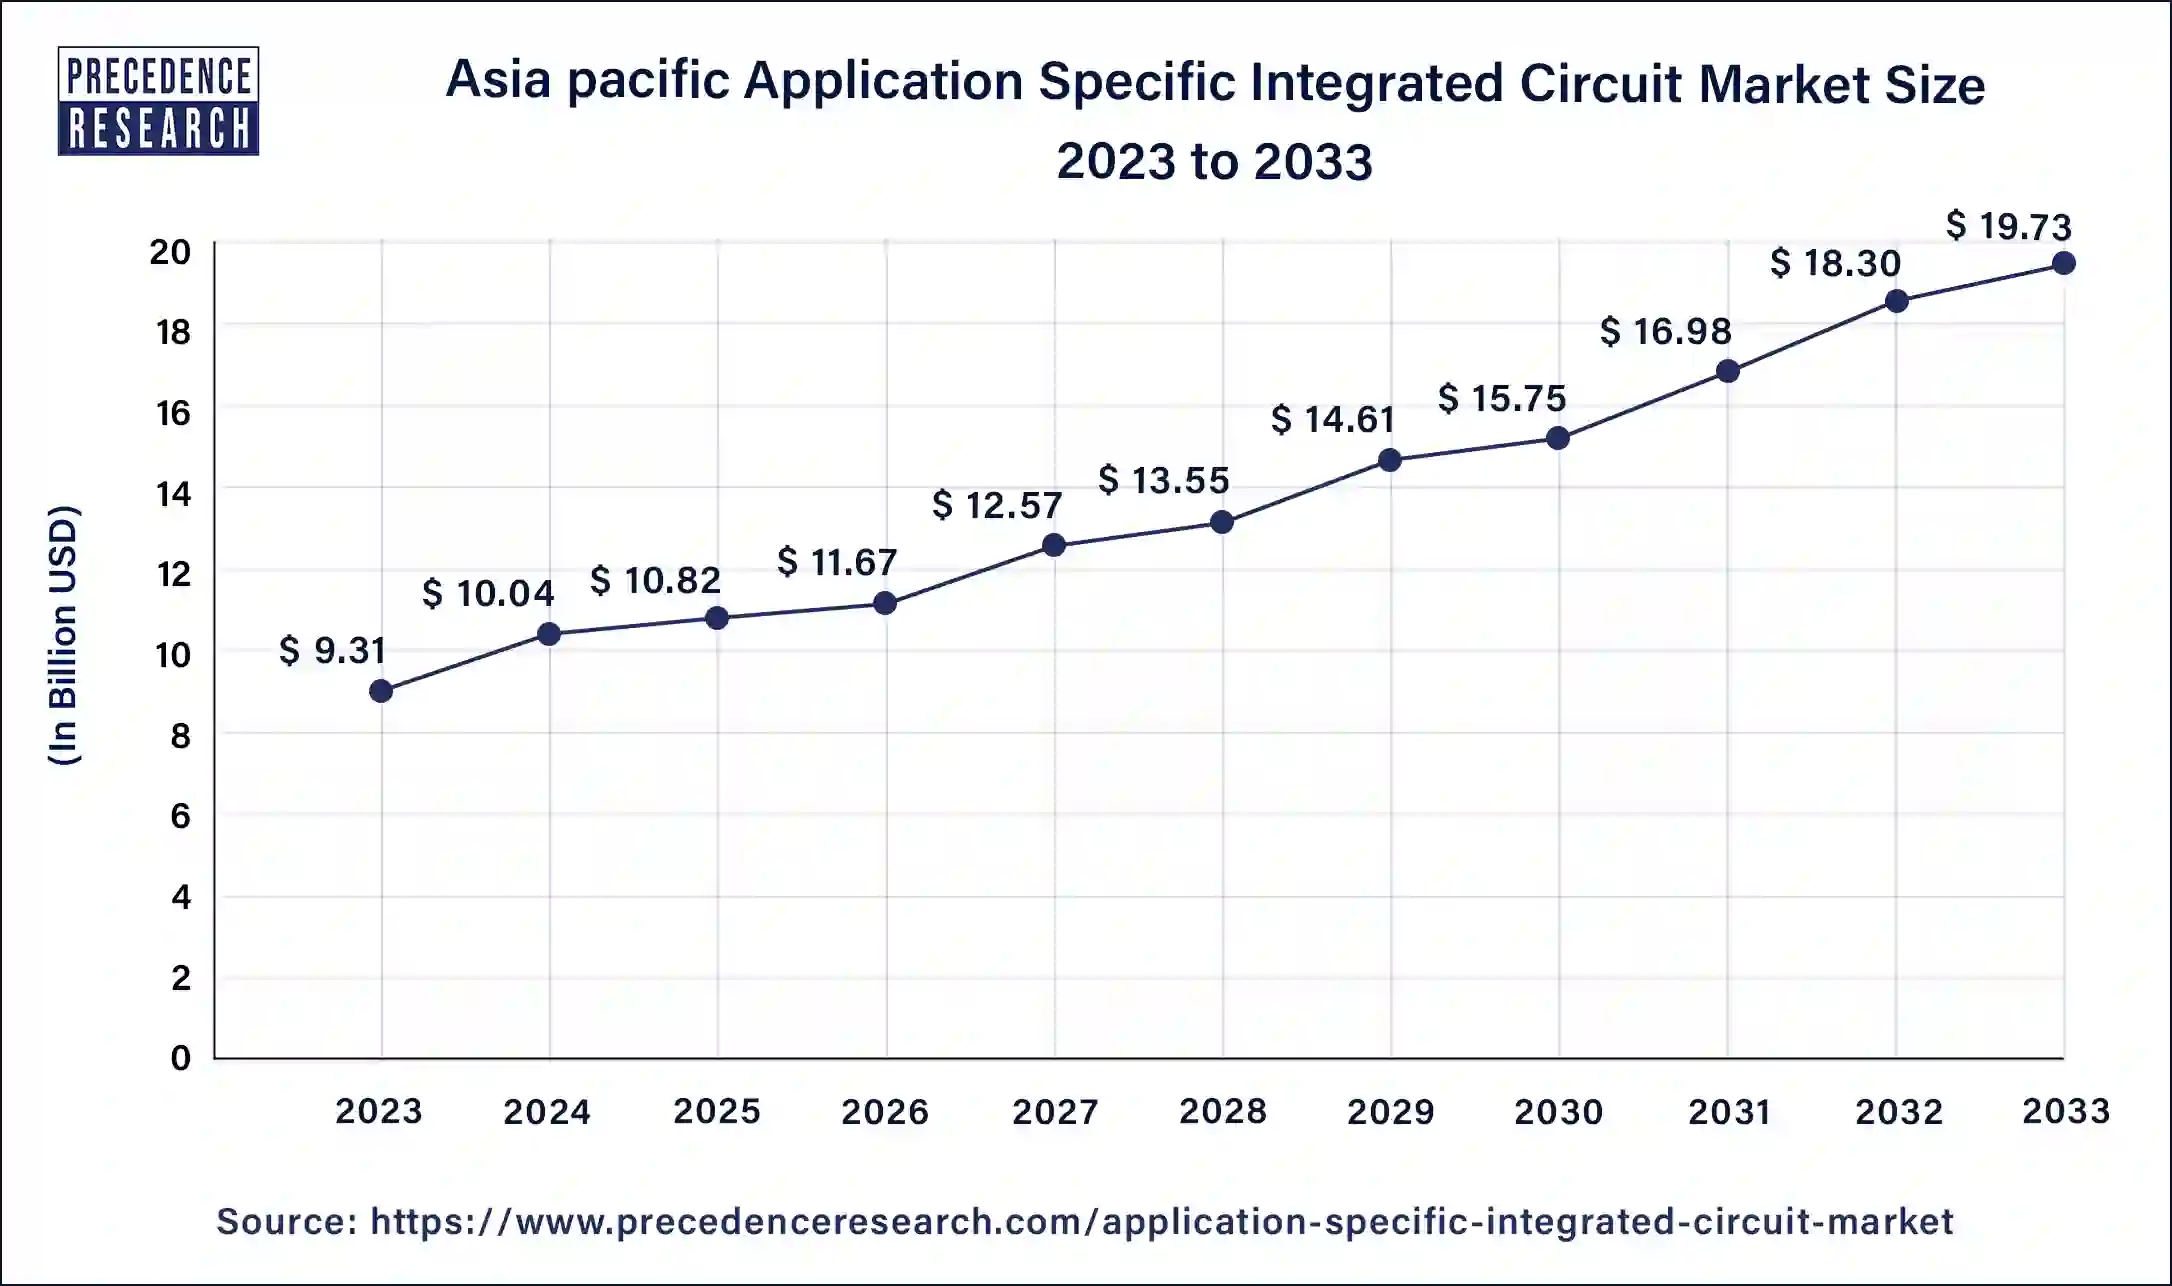 Asia Pacific Application Specific Integrated Circuit Market Size 2024 to 2033